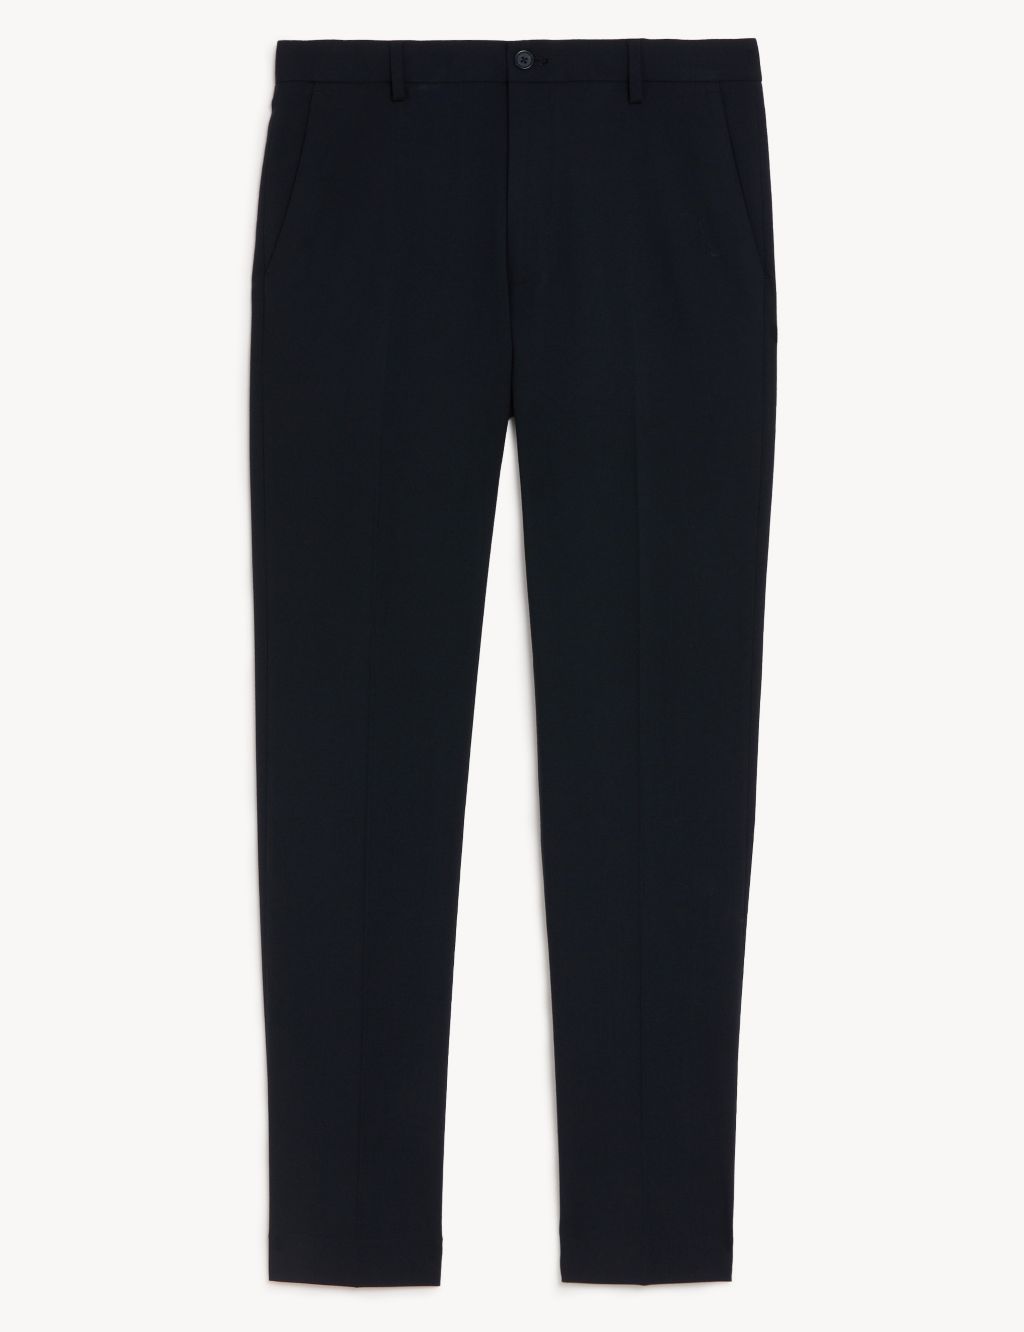 Tailored Fit Flat Front Stretch Trousers image 8